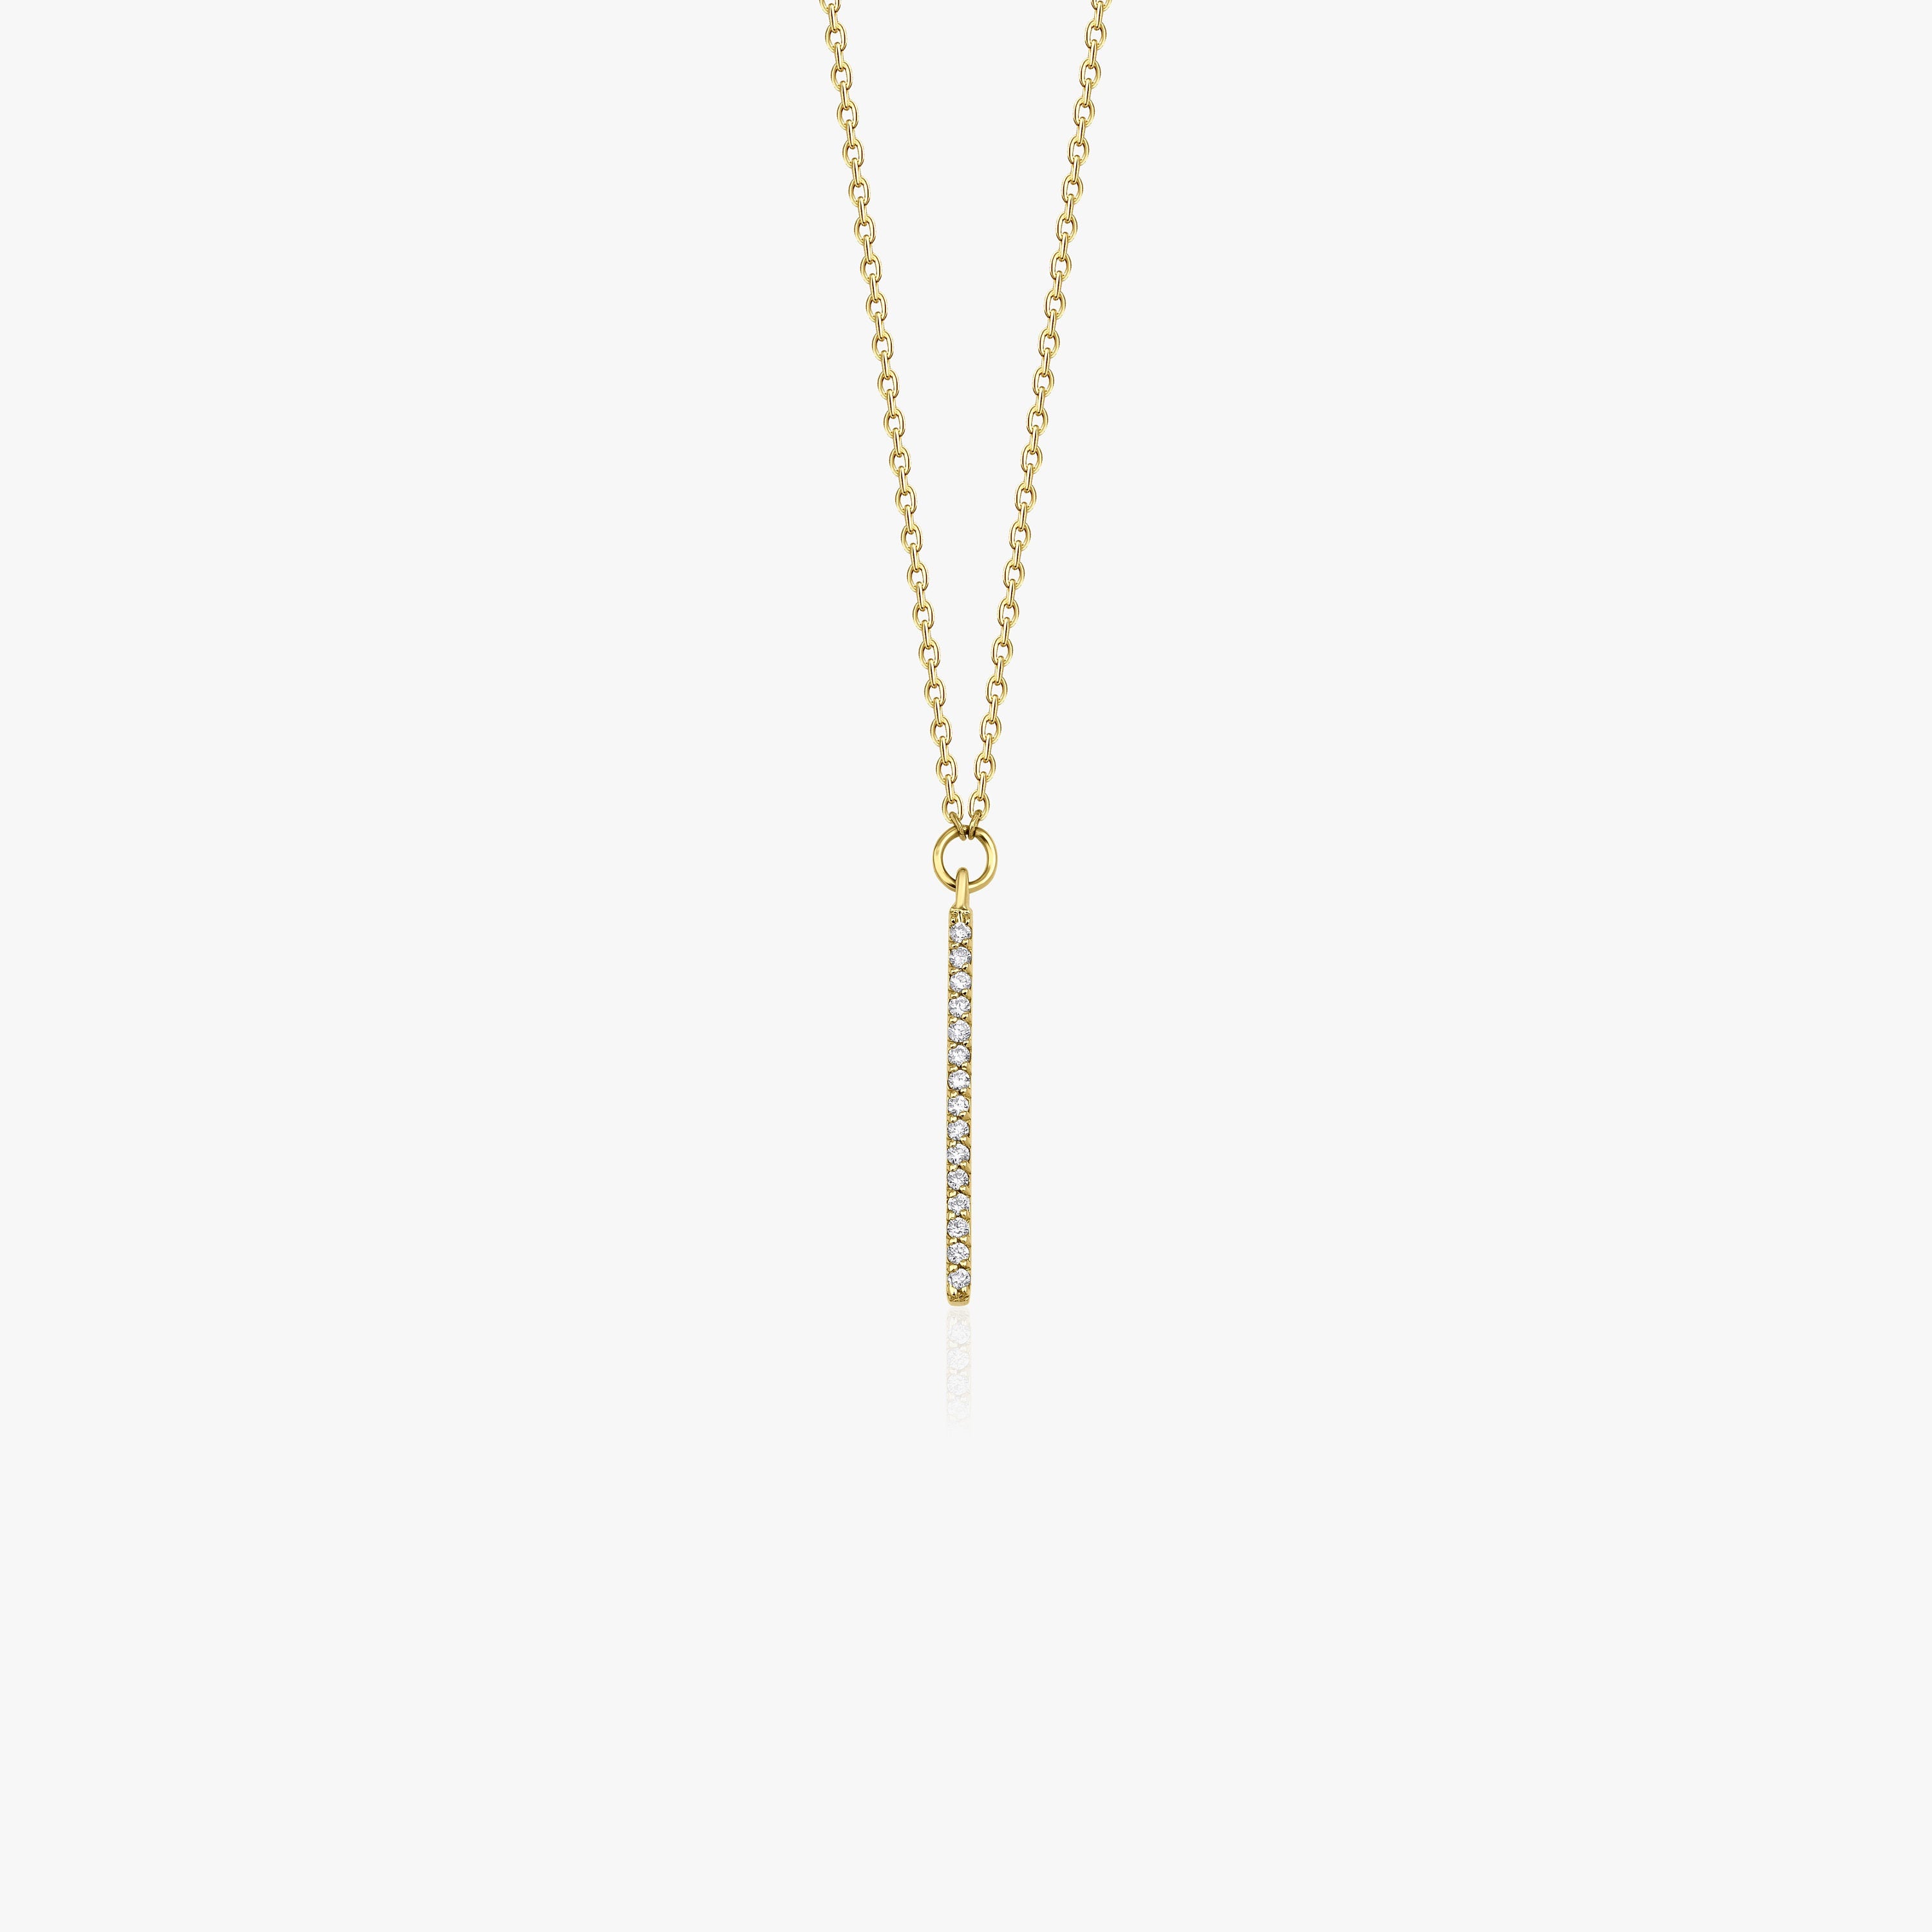 Diamond Vertical Bar Necklace Available in 14K and 18K Gold